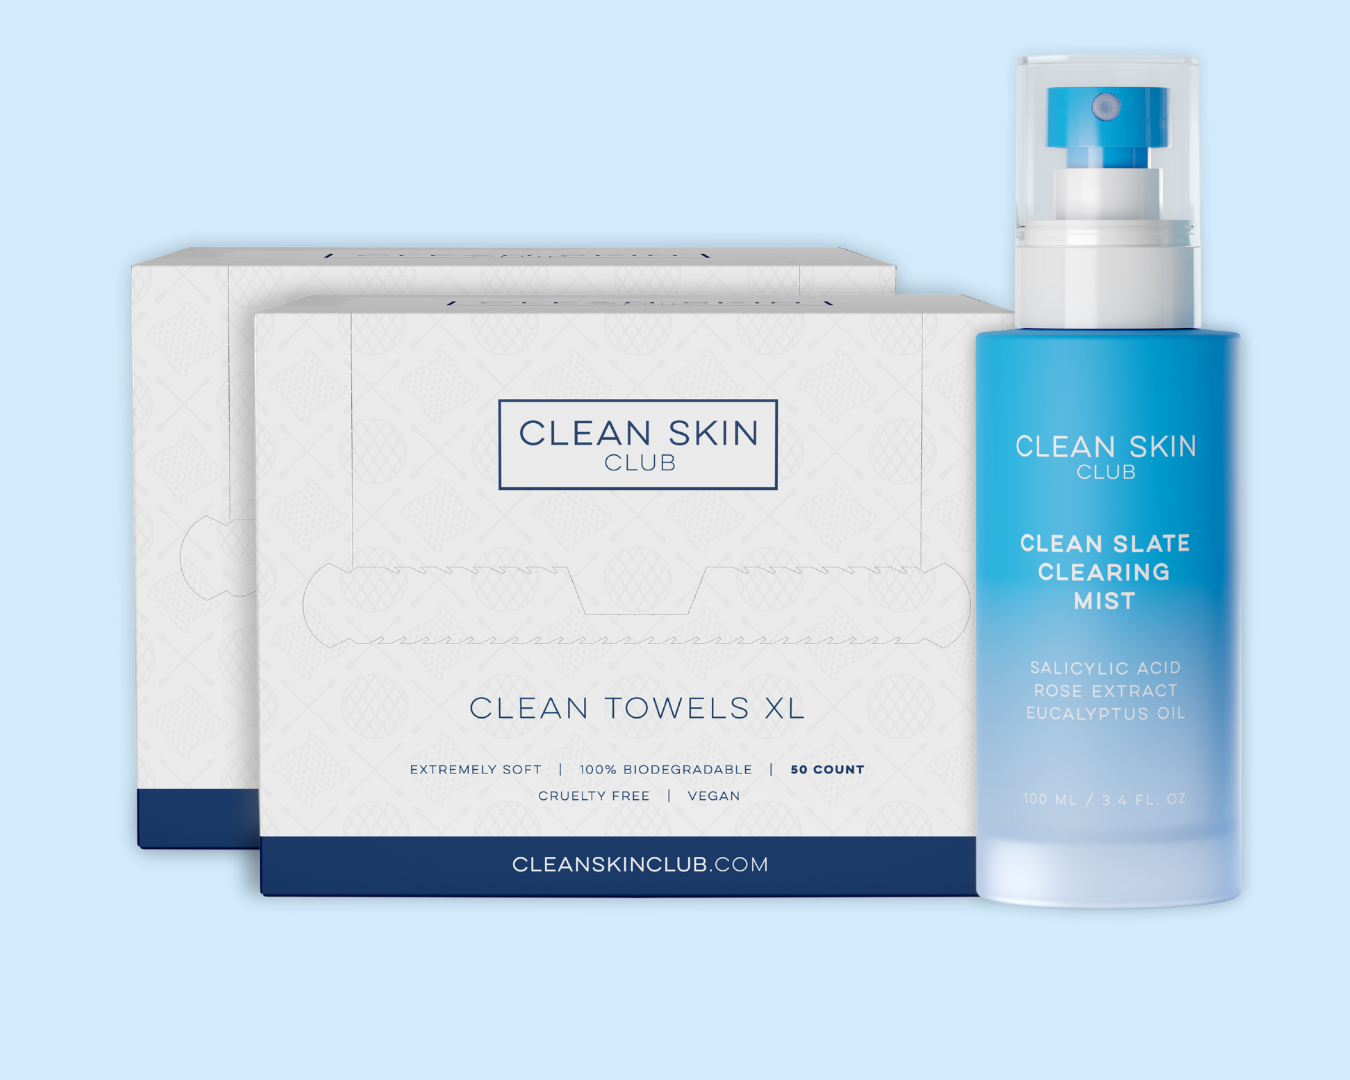 2 Clean Towels XL + 1 Skincare Product